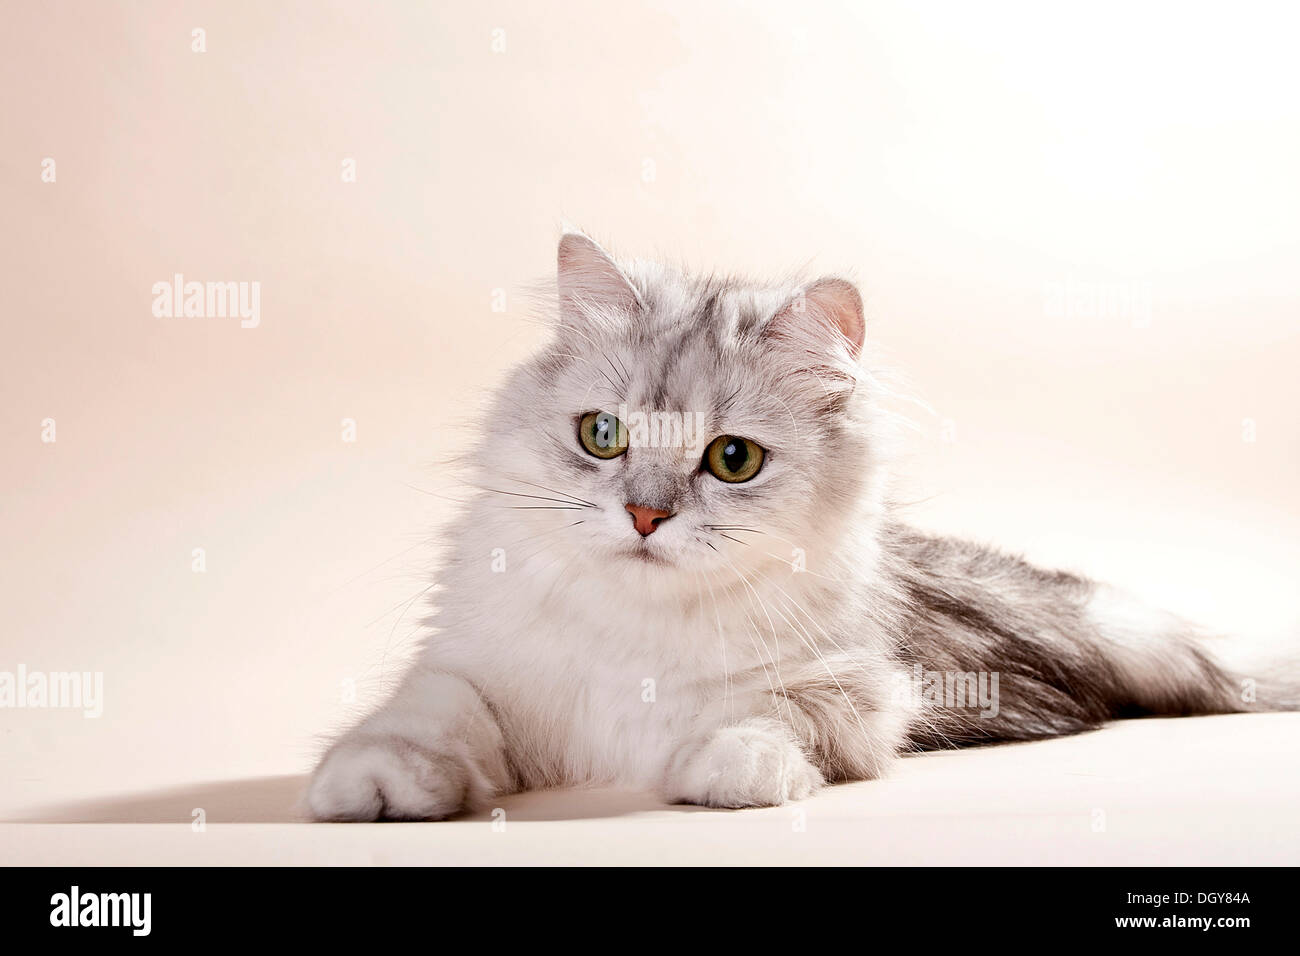 Silver-shaded British longhair cat lying on the floor Stock Photo